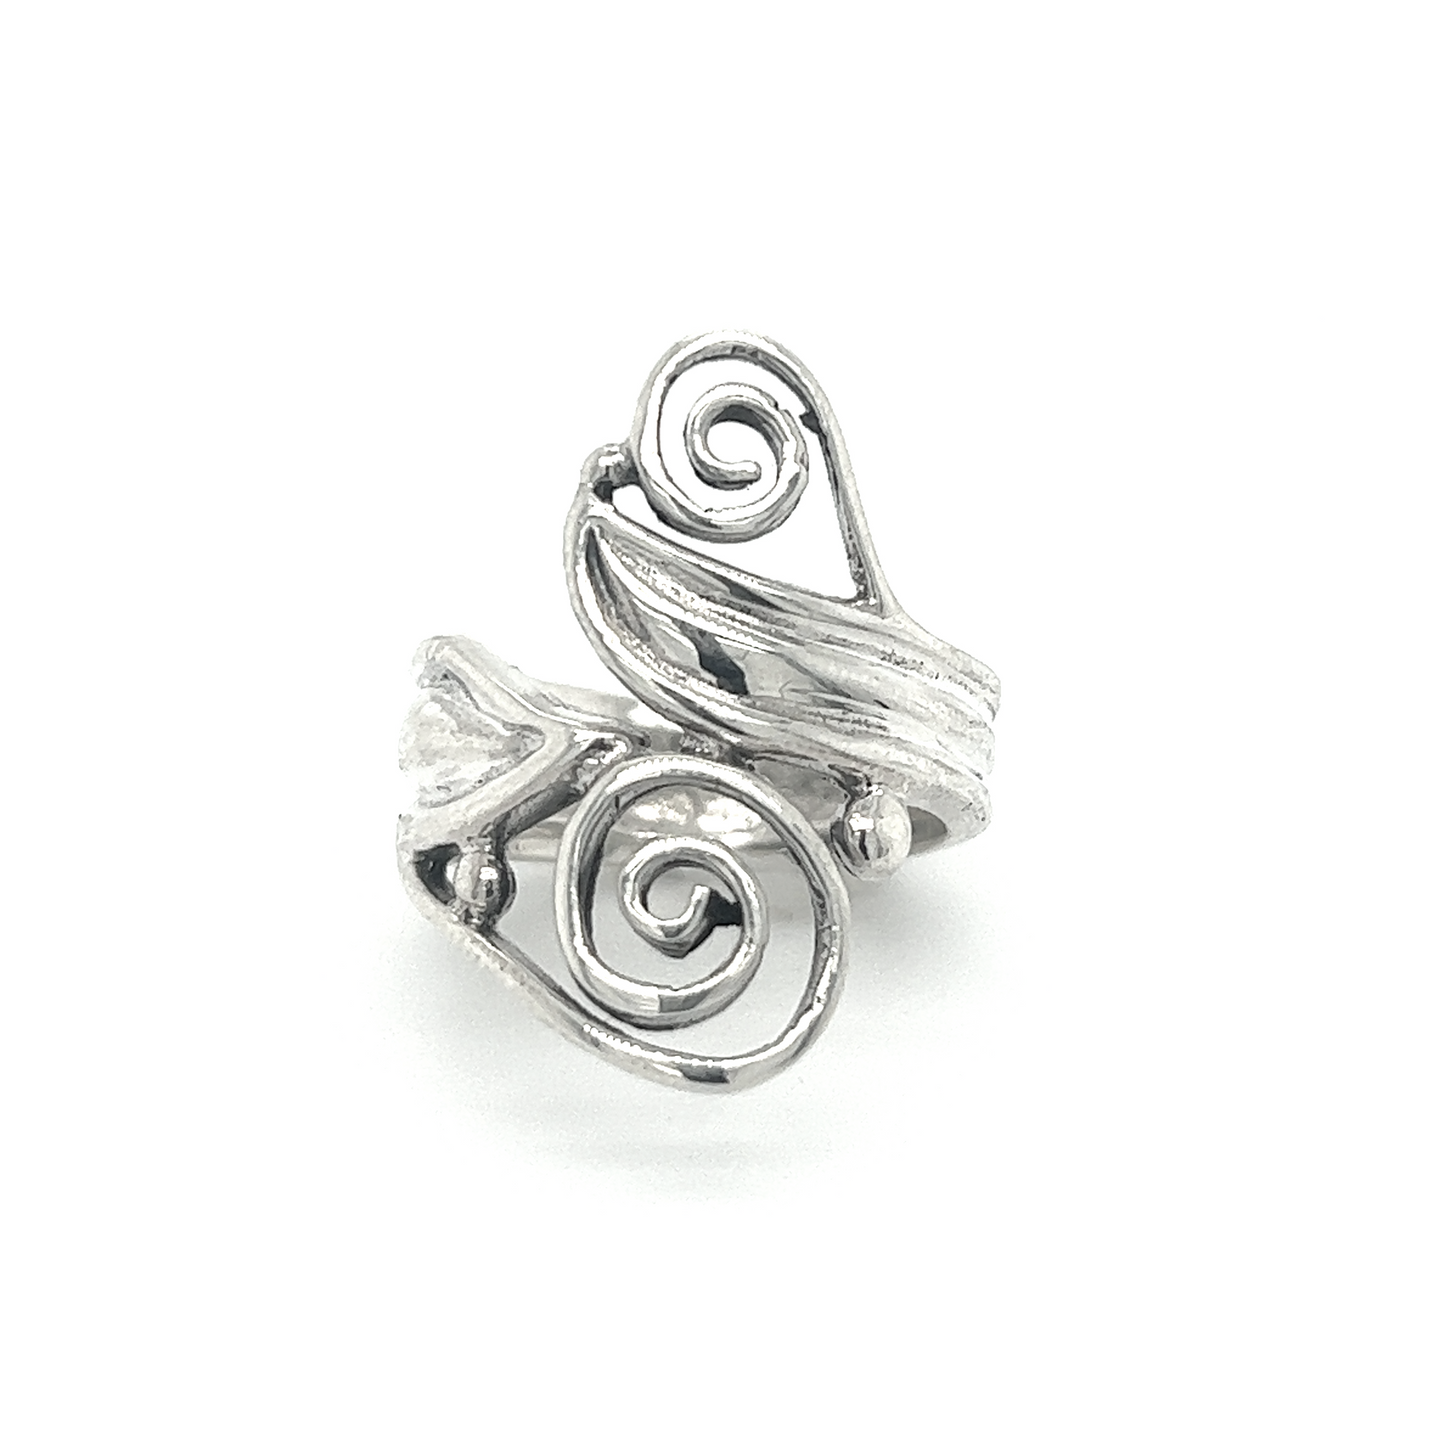 The Freeform Spiral Ring, embodying individuality and a touch of bohemian style, crafted in silver.